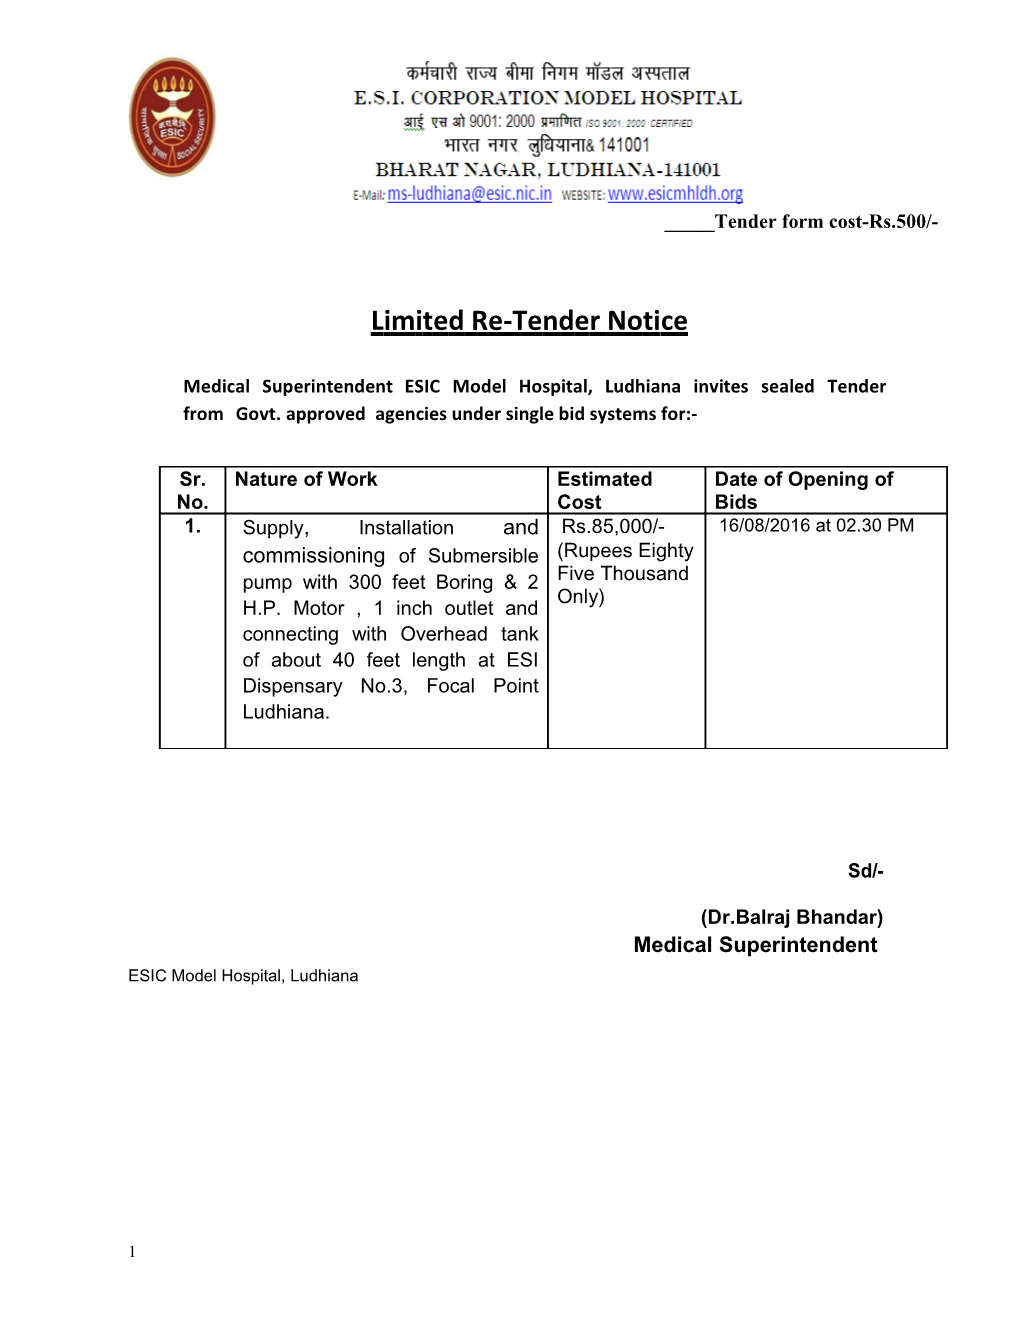 Limited Re-Tender Notice